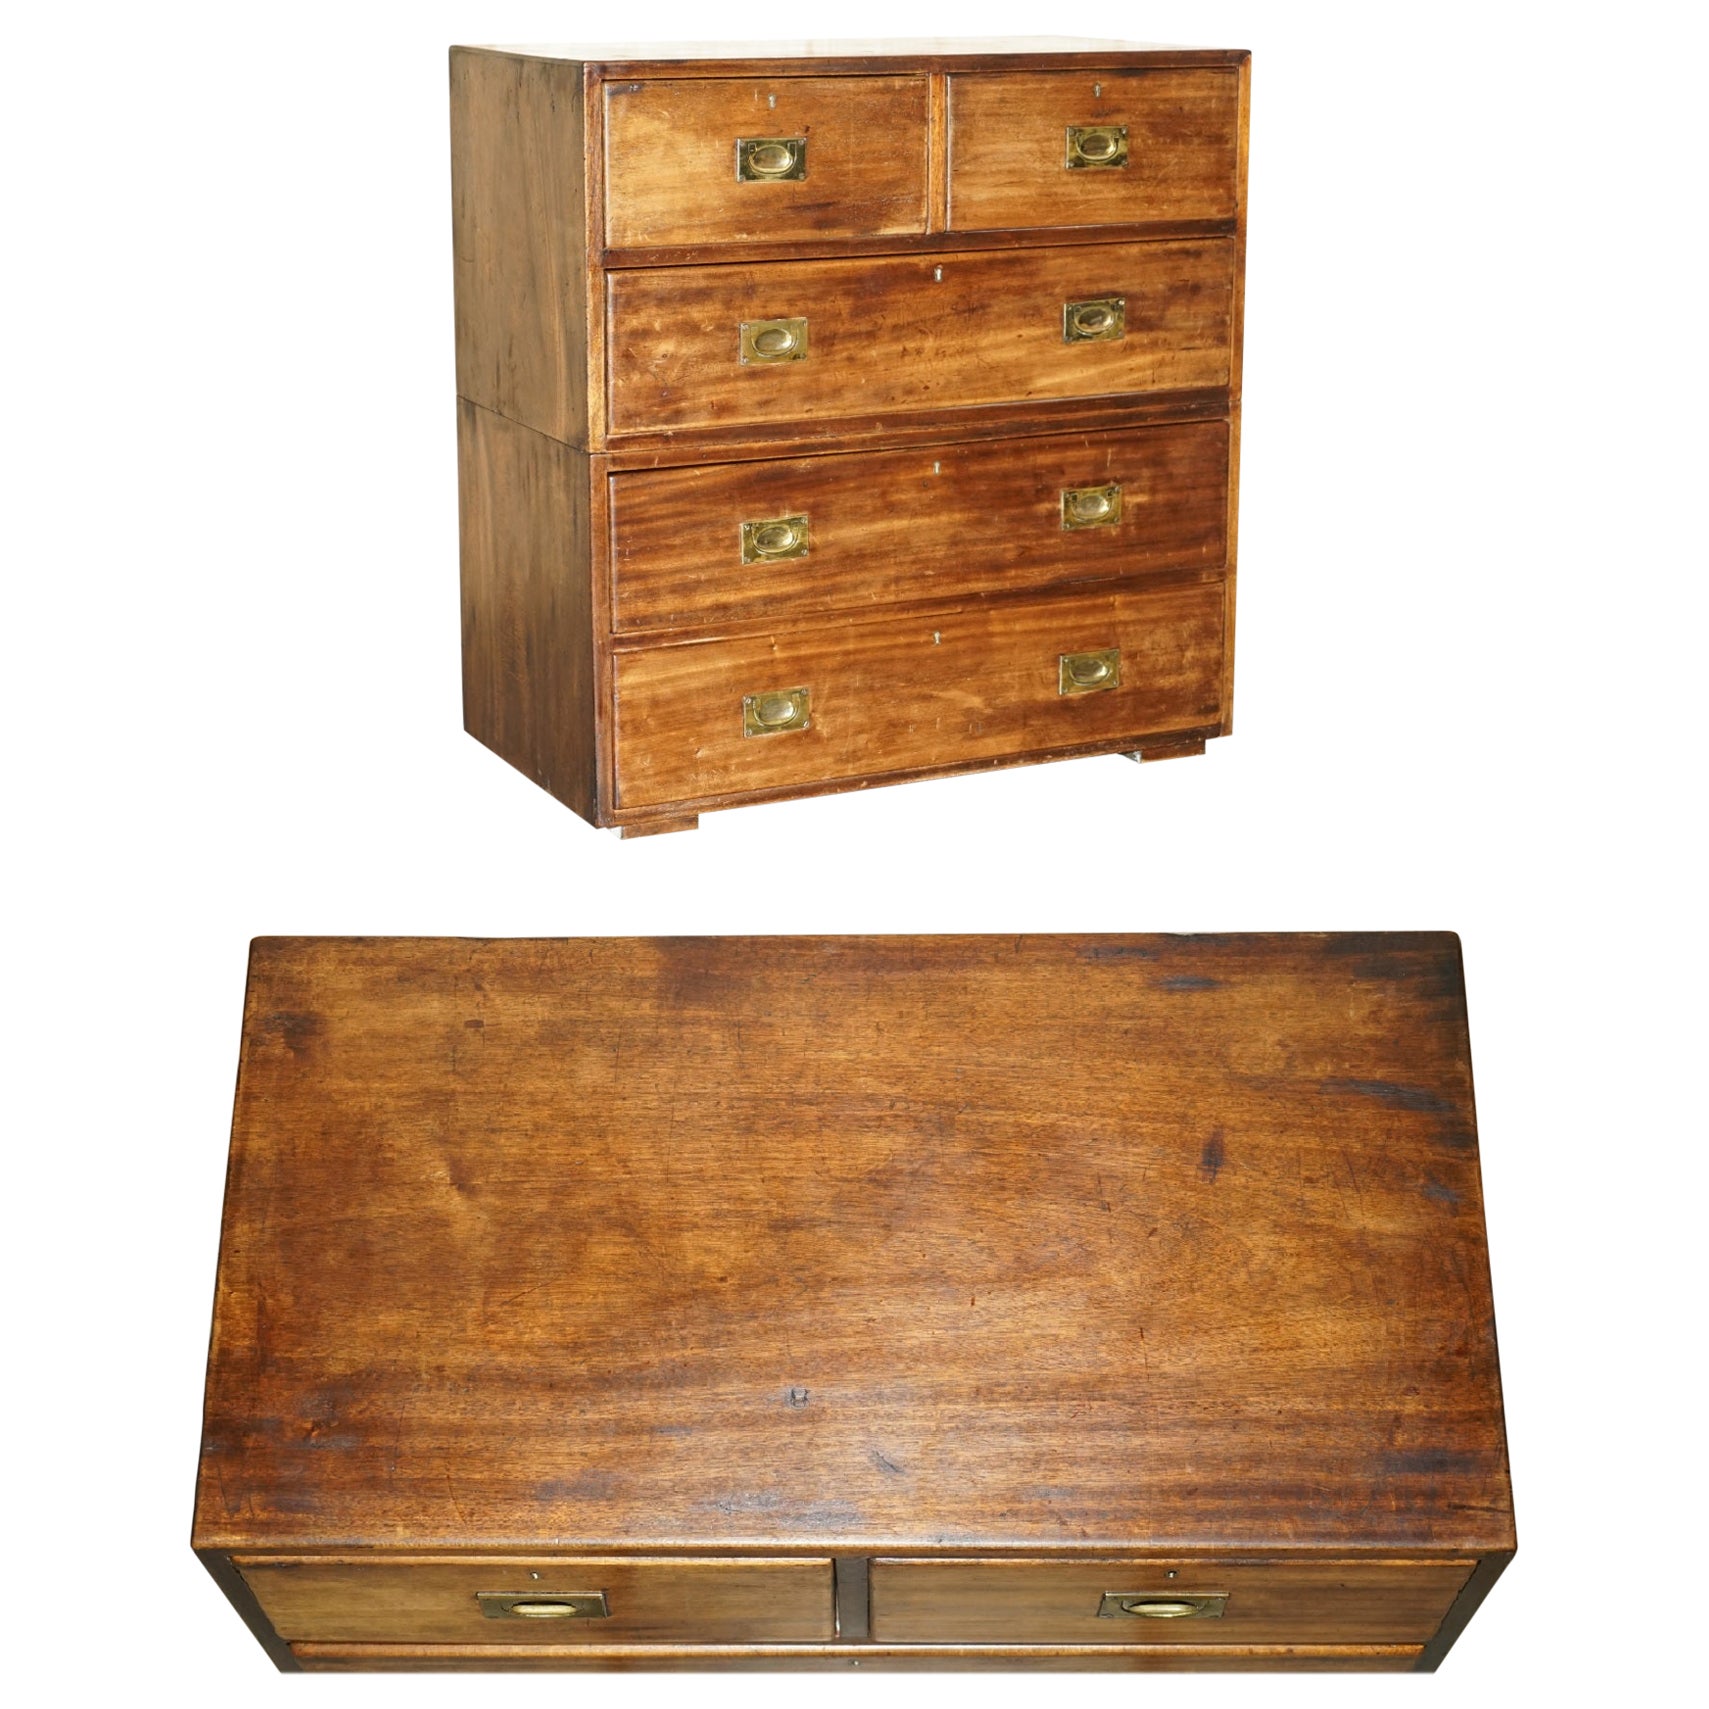 Original circa 1880 Hardwood Military Officers Campaign Chest of Drawers